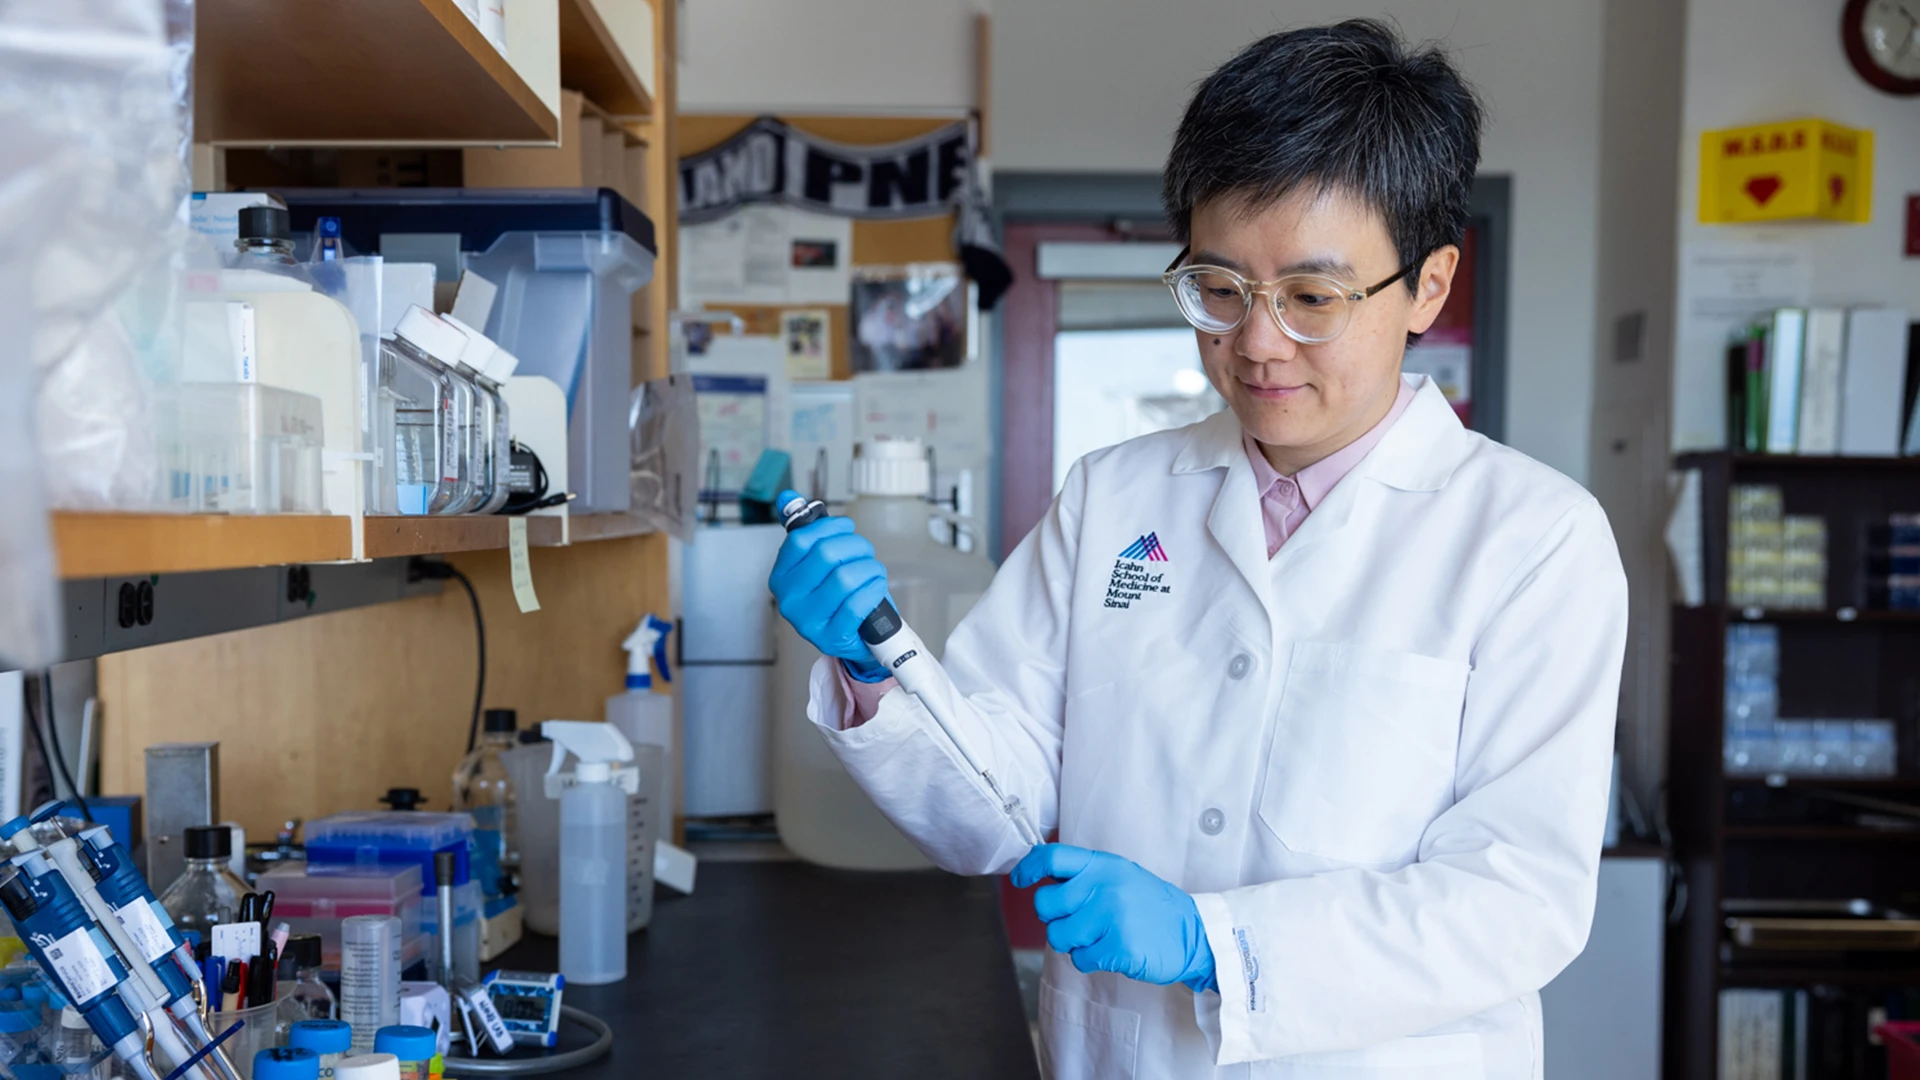 Dr. Wang is part of a Mount Sinai research team that has made recent breakthroughs in the understanding of liver fibrosis.